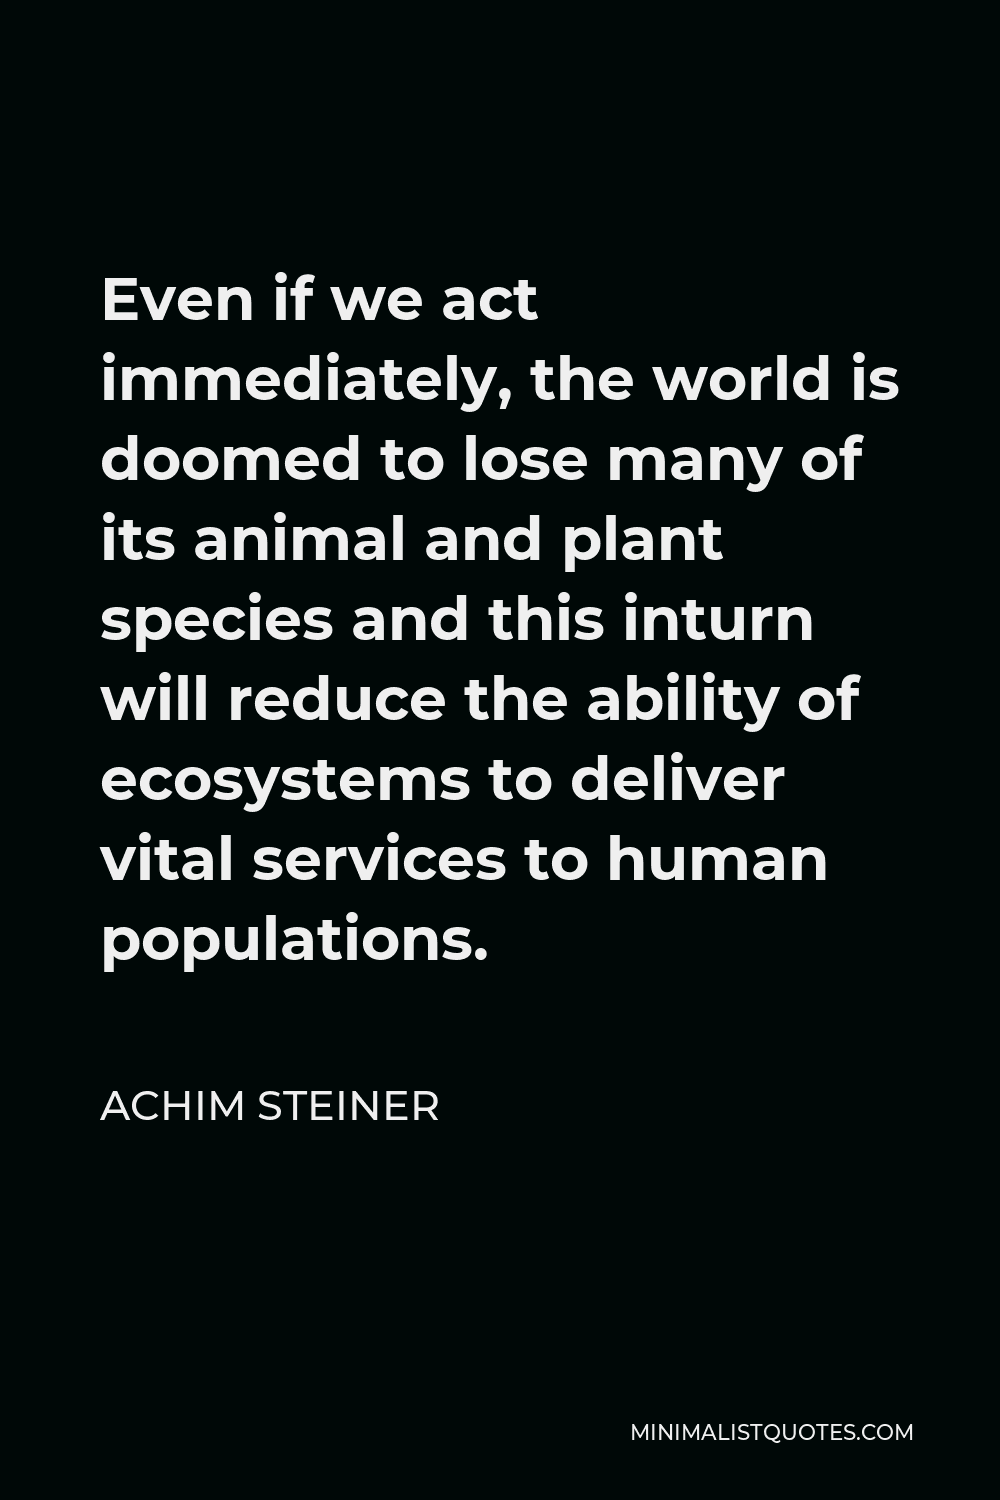 Achim Steiner Quote - Even if we act immediately, the world is doomed to lose many of its animal and plant species and this inturn will reduce the ability of ecosystems to deliver vital services to human populations.